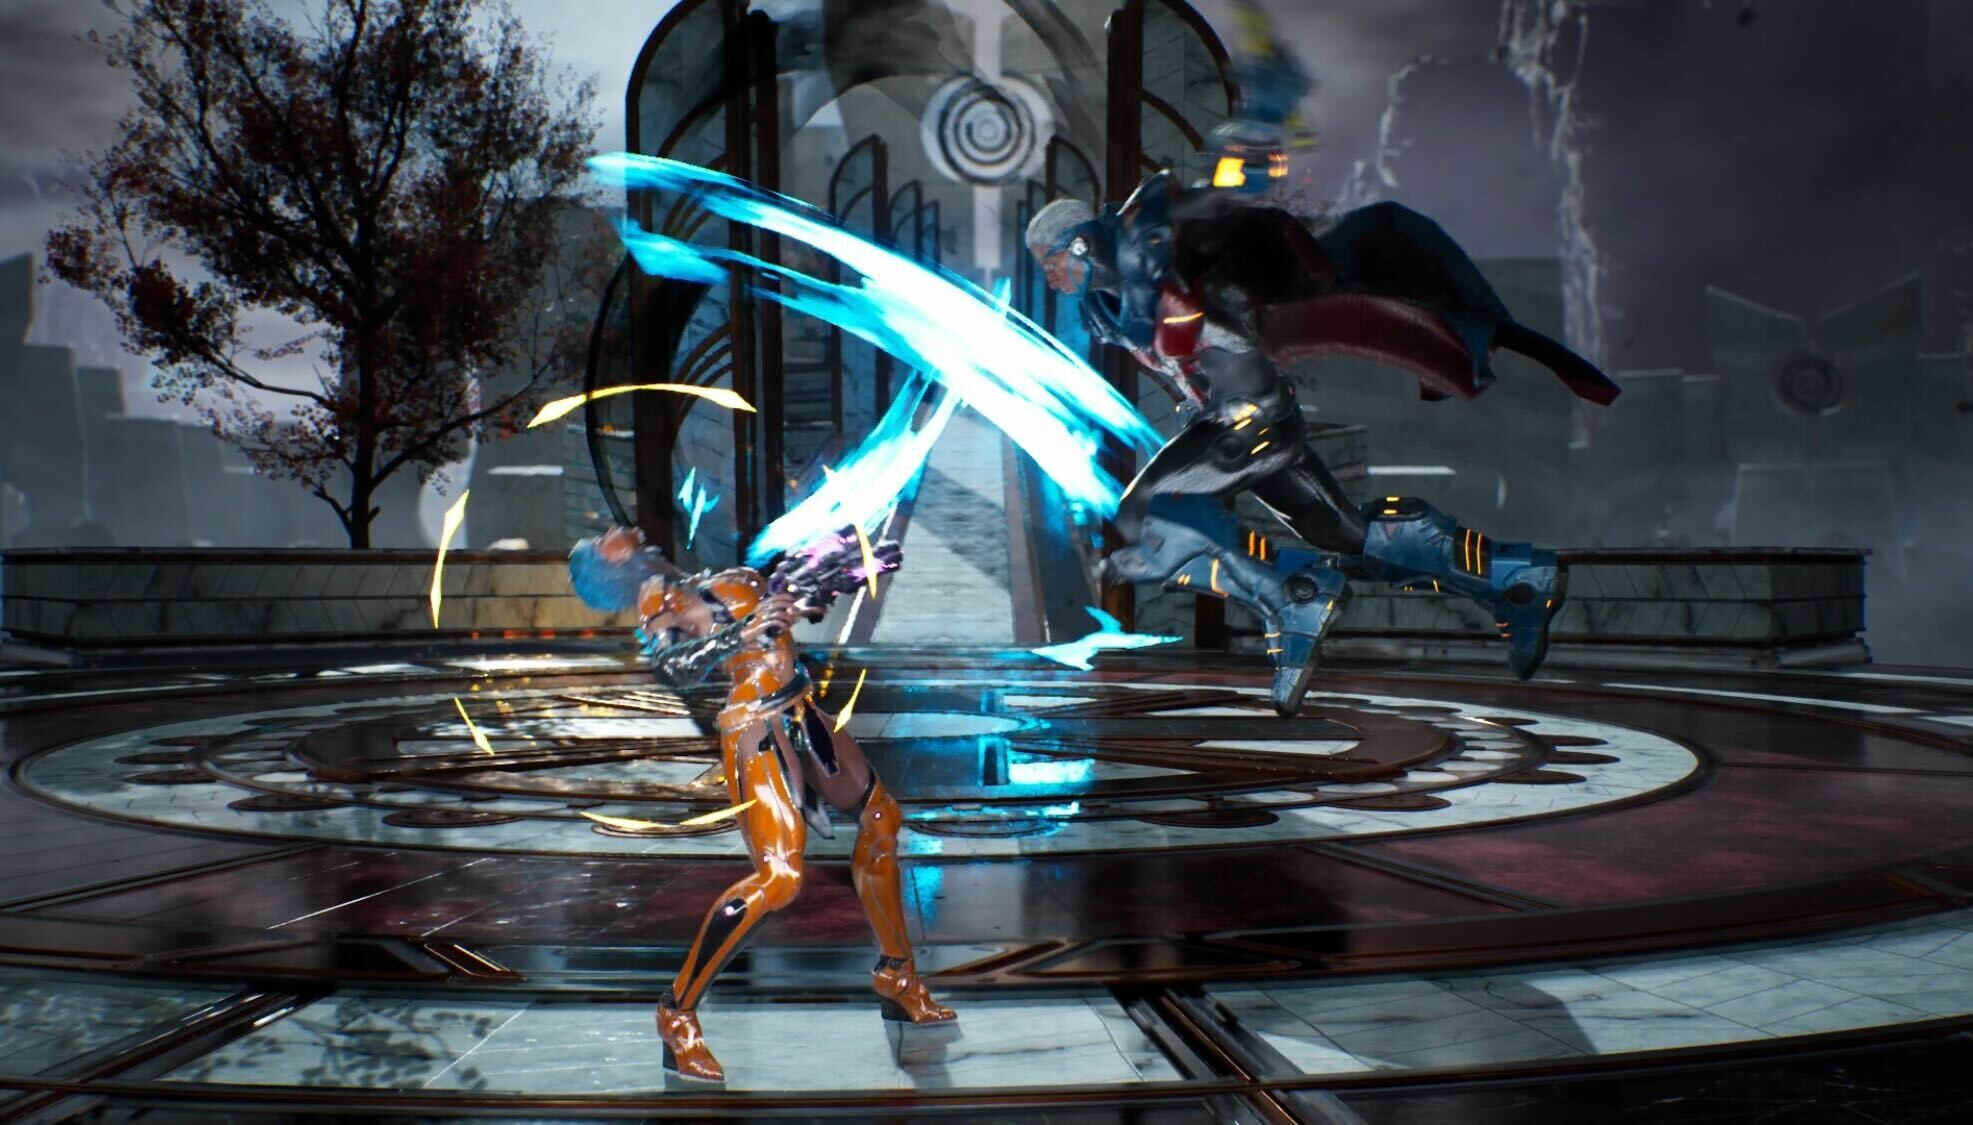 A screenshot from Coreupt. A woman with blue hair and an orange/silver metallic suit is being attacked by a grey-haired man with a blue and red outfit with a cape.